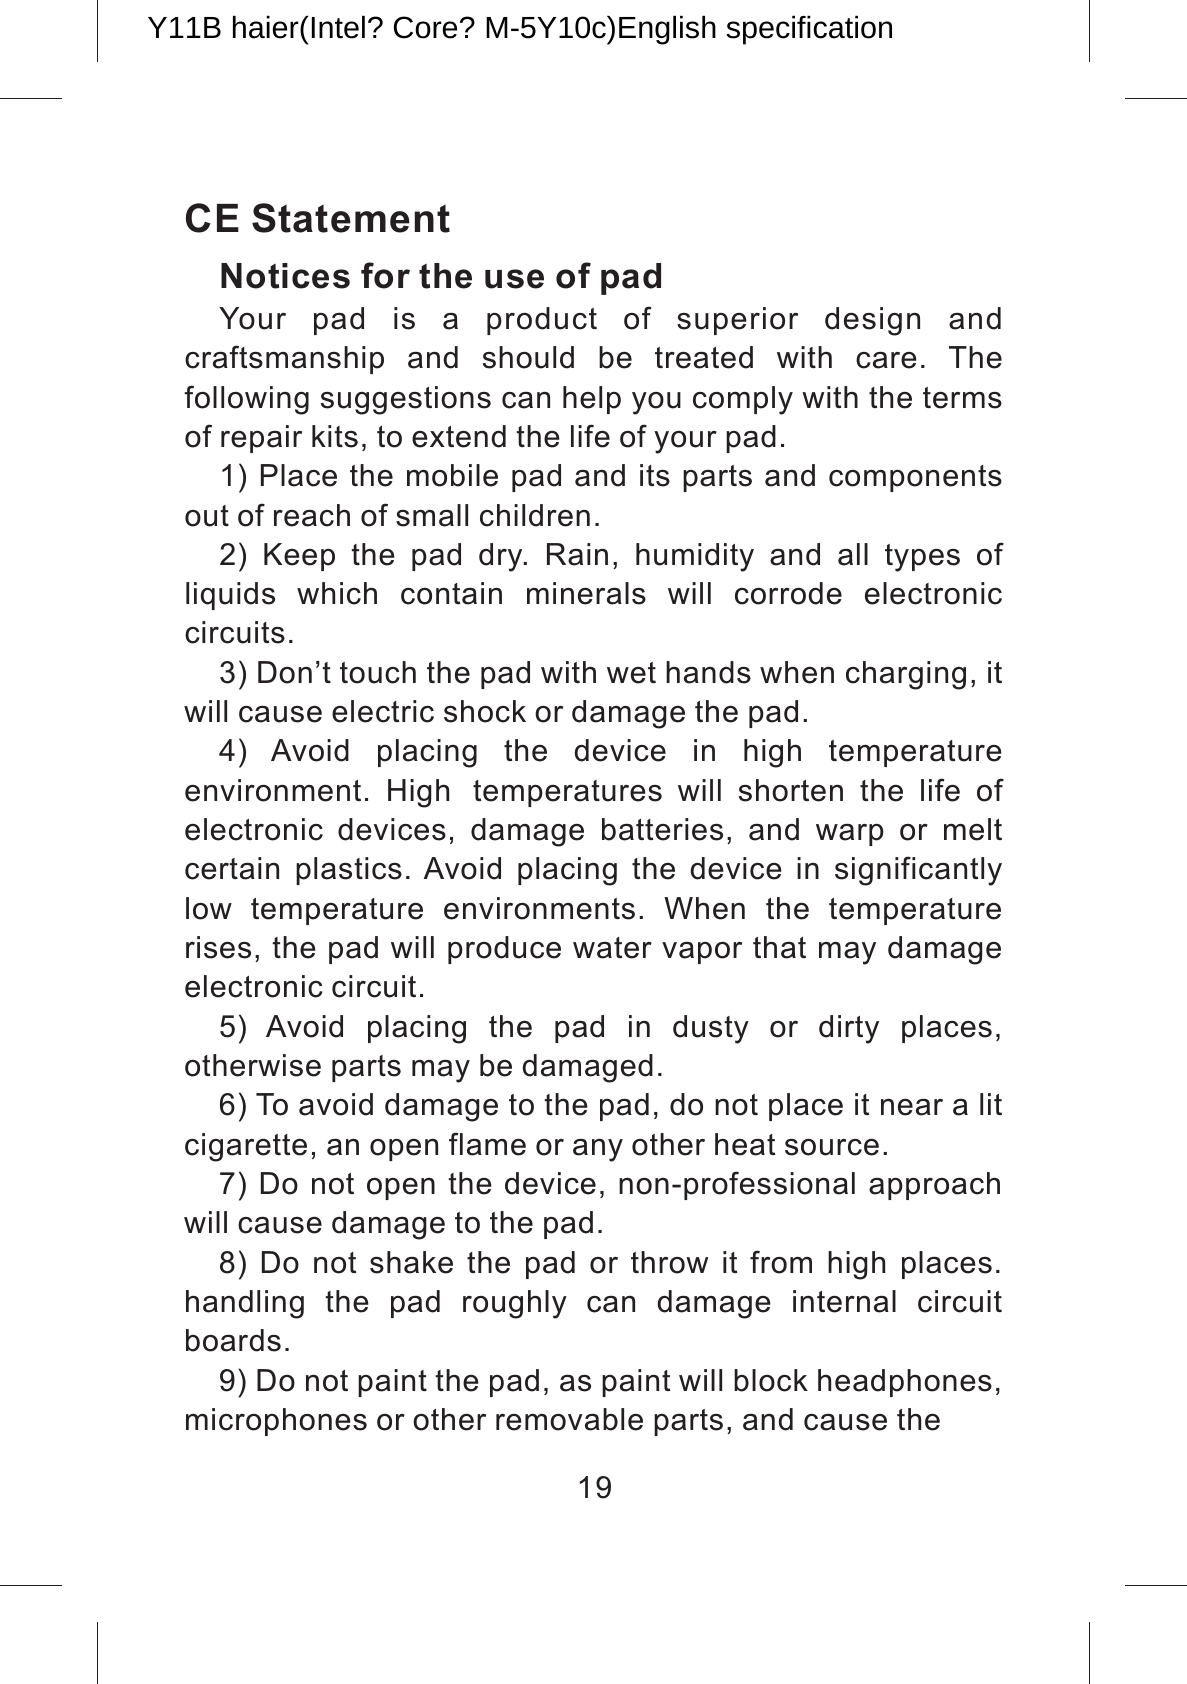 CE StatementNotices for the use of pad Your  pad  is  a  product  of  superior  design  and craftsmanship  and  should  be  treated  with  care.  The following suggestions can help you comply with the terms of repair kits, to extend the life of your pad.1) Place the mobile pad and its parts and components out of reach of small children.2)  Keep  the  pad  dry.  Rain,  humidity  and  all  types  of liquids  which  contain  minerals  will  corrode  electronic circuits.3) Don’t touch the pad with wet hands when charging, it will cause electric shock or damage the pad. 4)  Avoid  placing  the  device  in  high  temperature environment.  High temperatures  will  shorten  the  life  of electronic  devices,  damage  batteries,  and  warp  or  melt certain  plastics. Avoid  placing  the  device  in  significantly low  temperature  environments.  When  the  temperature rises, the pad will produce water vapor that may damage electronic circuit. 5)  Avoid  placing  the  pad  in  dusty  or  dirty  places, otherwise parts may be damaged.6) To avoid damage to the pad, do not place it near a lit cigarette, an open flame or any other heat source.7) Do not open the device, non-professional approach will cause damage to the pad. 8) Do not shake the  pad  or throw  it from high places. handling  the  pad  roughly  can  damage  internal  circuit boards.9) Do not paint the pad, as paint will block headphones, microphones or other removable parts, and cause the 19Y11B haier(Intel? Core? M-5Y10c)English specification 